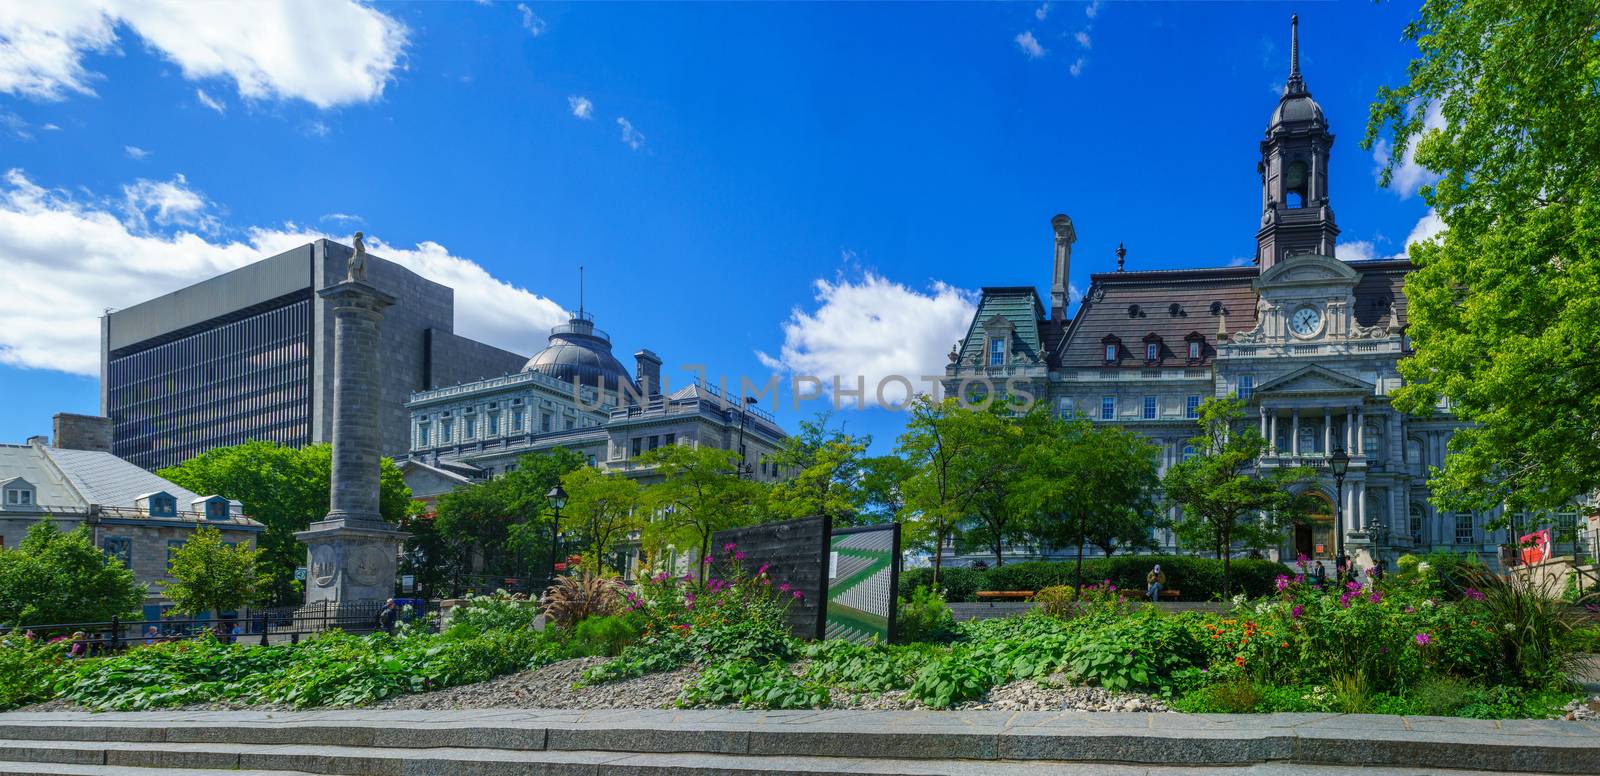 City Hall and other buildings, in Montreal, by RnDmS